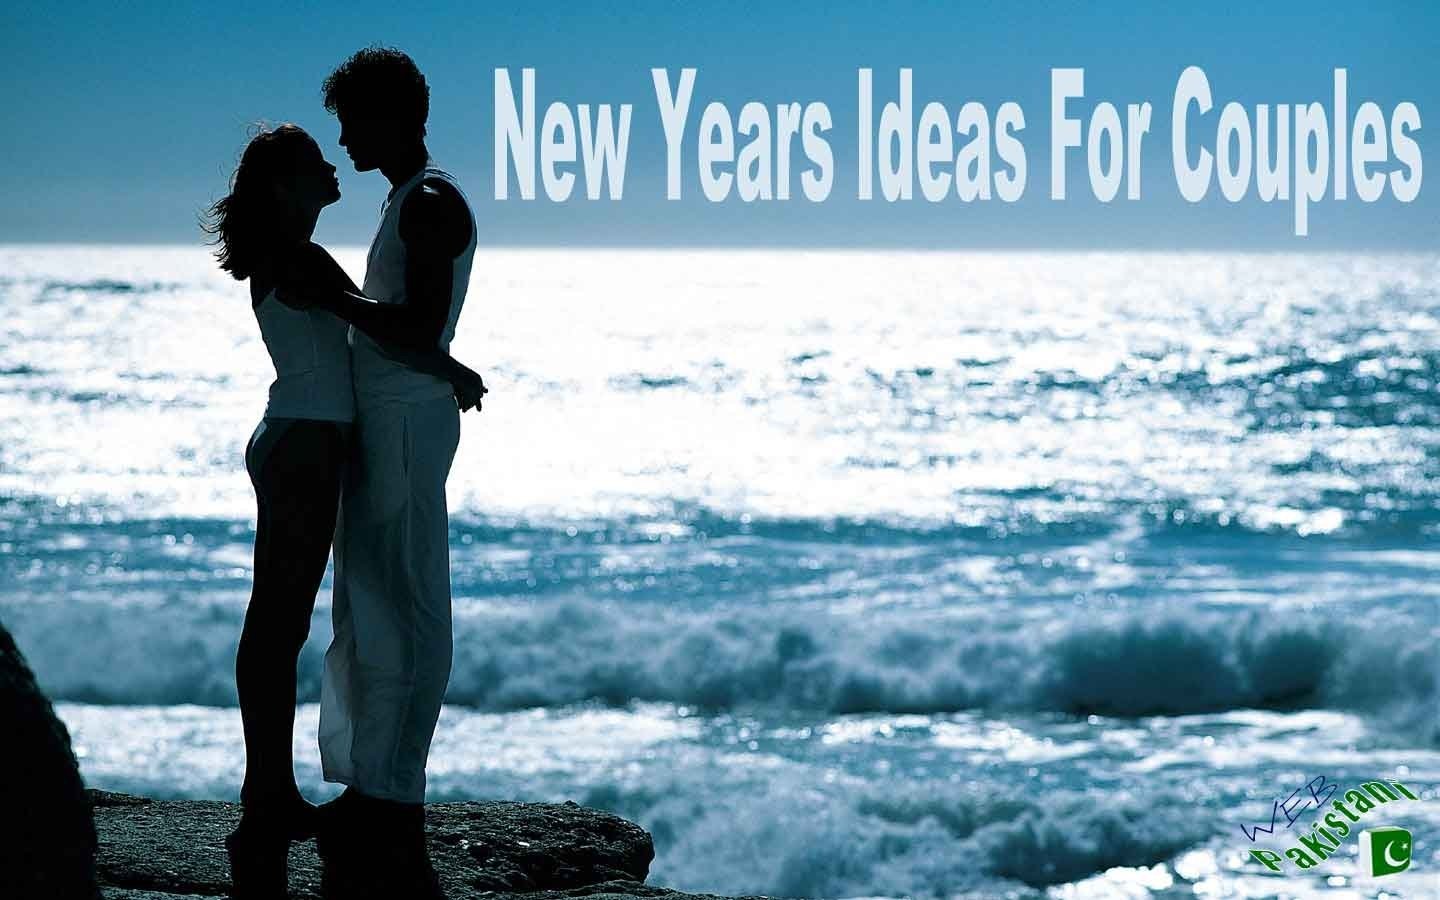 10 Trendy New Years Ideas For Couples new year ideas for couples photograph new years 2013 ideas 2022